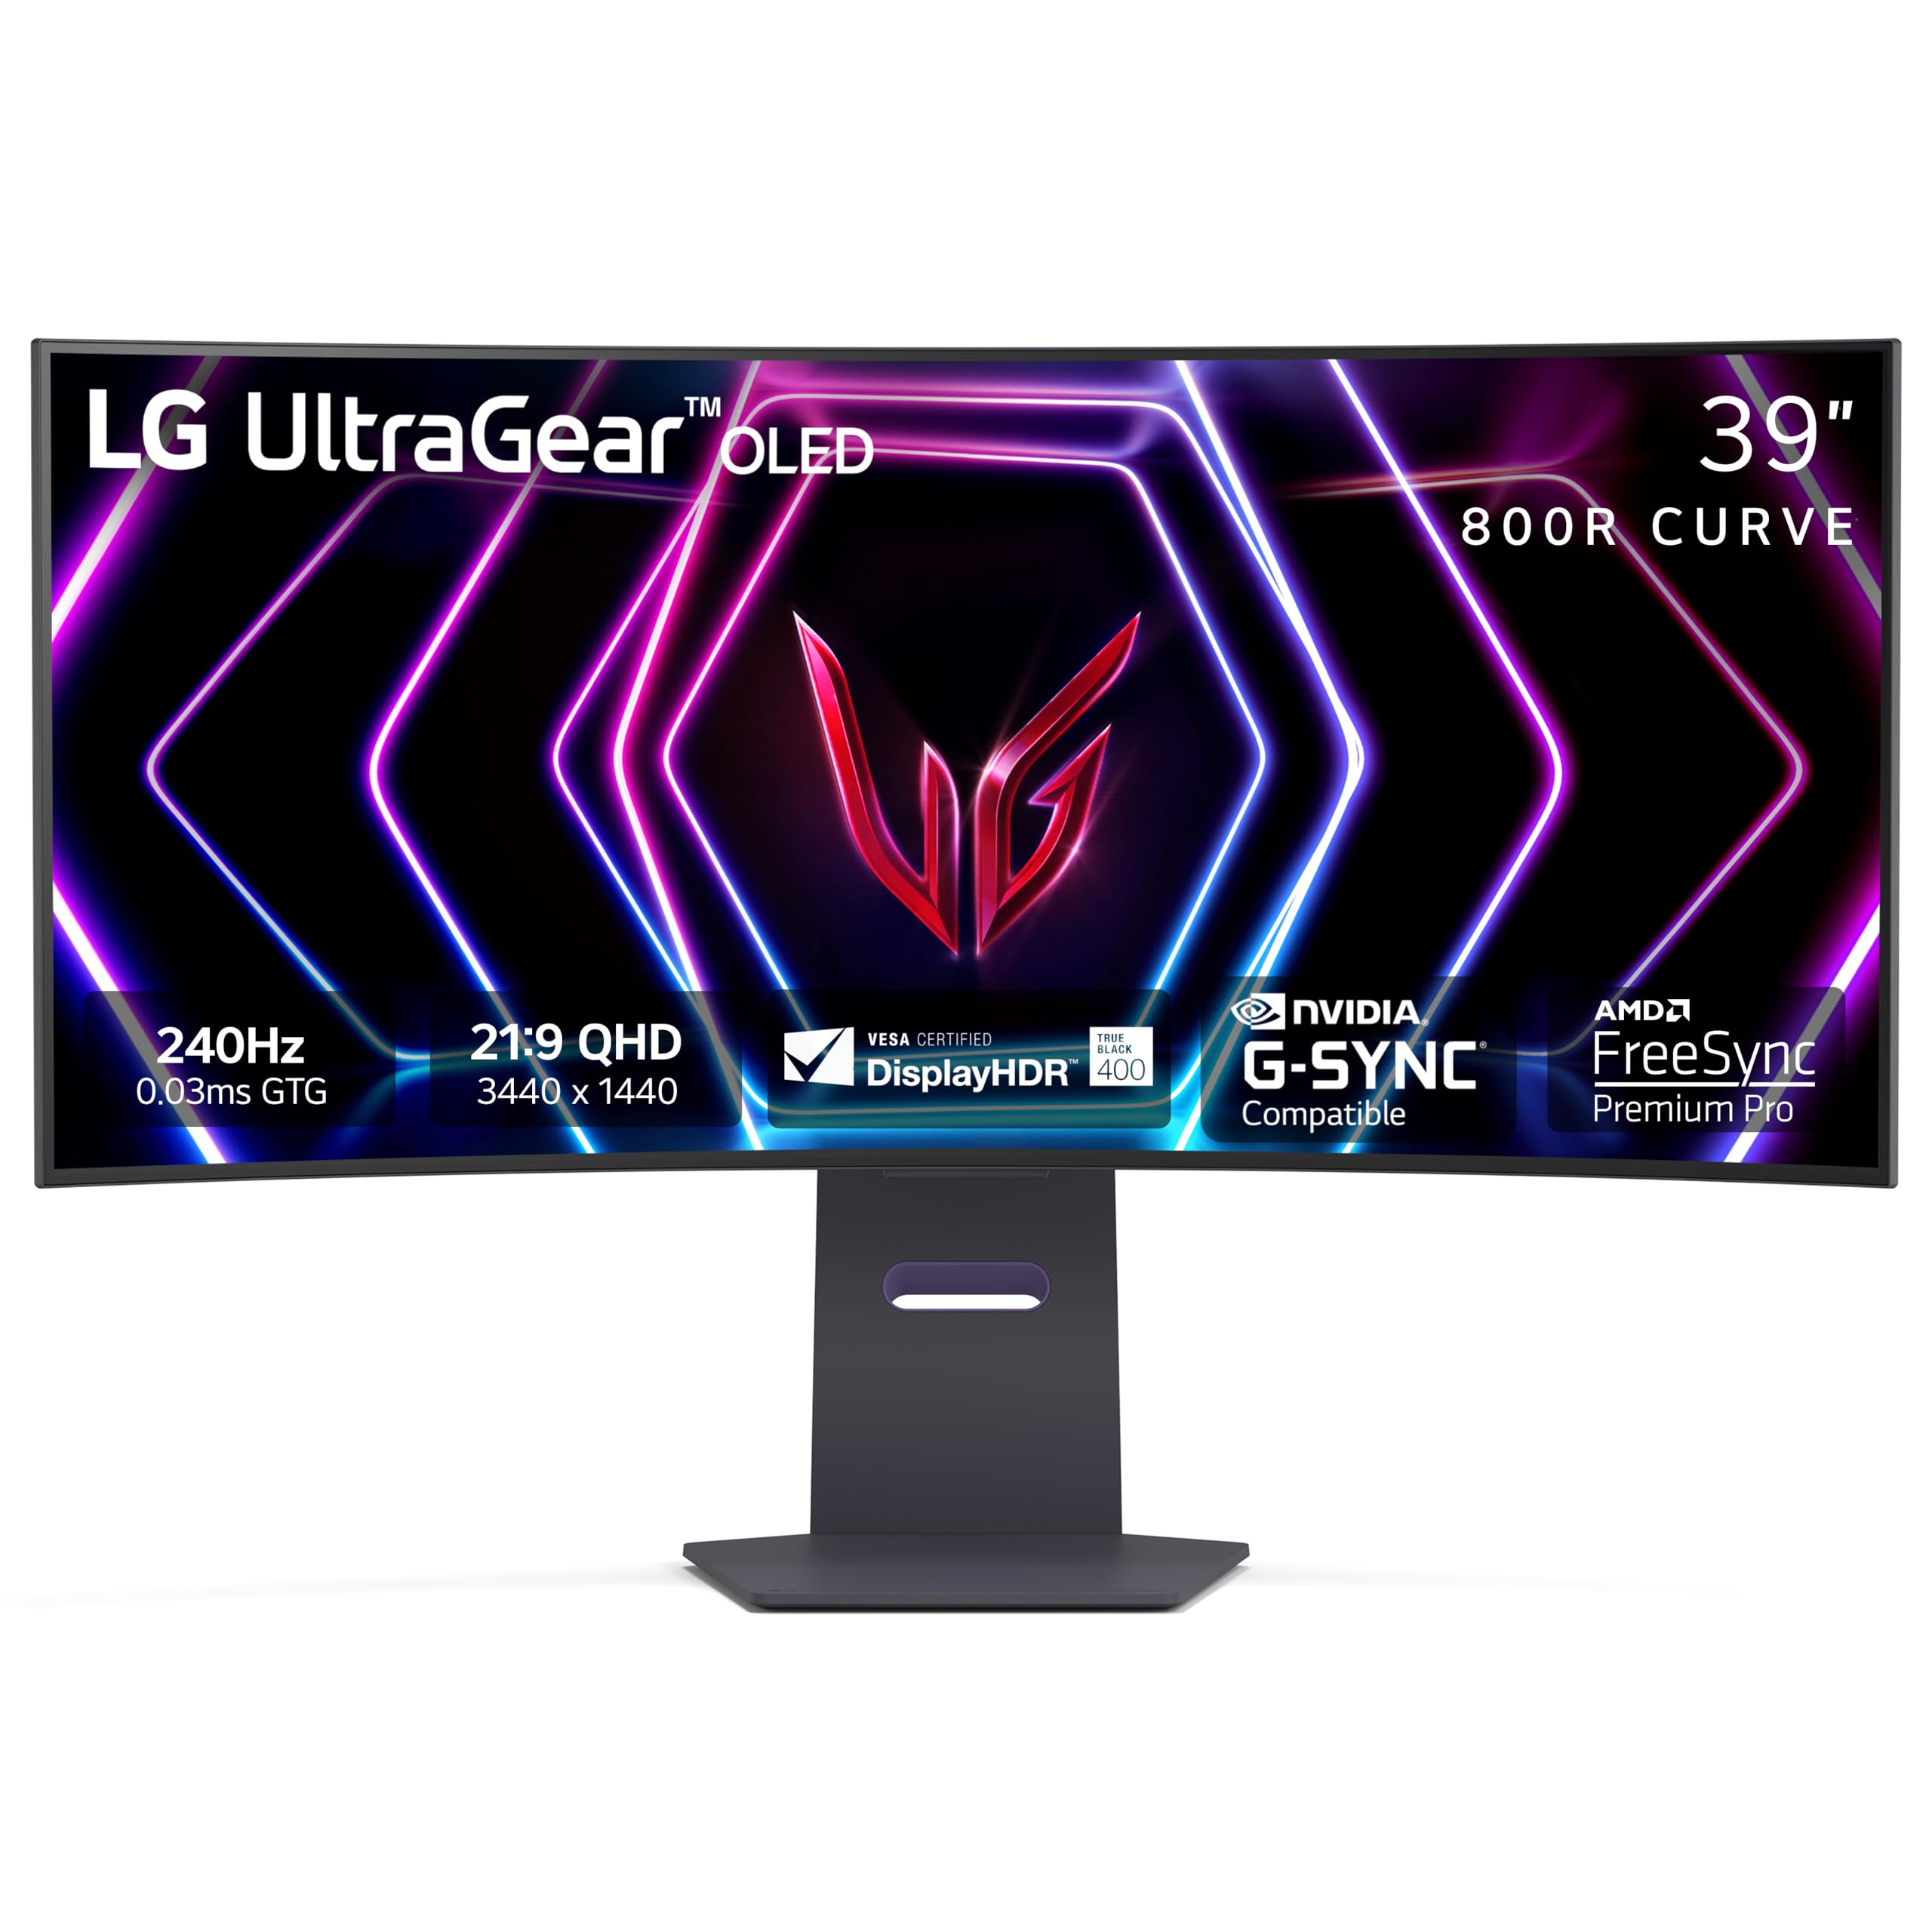 39" LG Ultragear 240Hz OLED 800R Curved Gaming Monitor $1000 + Free Shipping